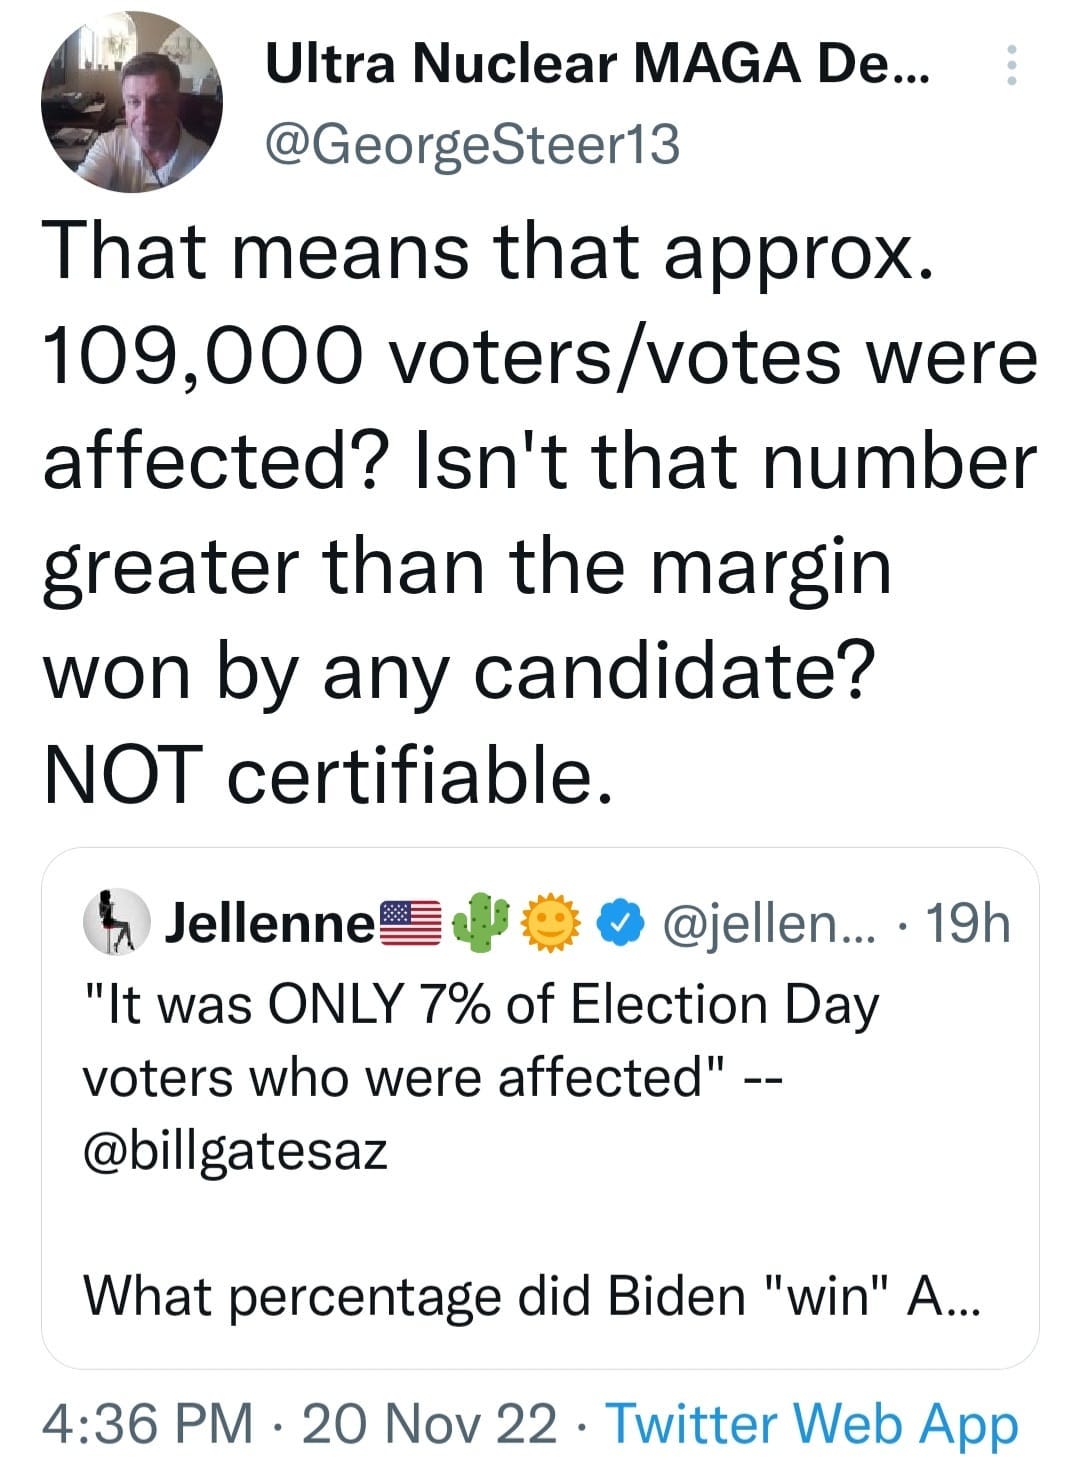 May be a Twitter screenshot of 1 person and text that says 'Ultra Nuclear MAGA De... @GeorgeSteer13 That means that approx. 109,000 /vos were affected? Isn't that number greater than the margin won by any candidate? NOT certifiable. Jellenne @jellen... "It was ONLY 7% of Election Day voters who were affected"-- @billgatesaz 19h What percentage did Biden "win" A... 4:36 PM 20 Nov 22. Twitter Web App'